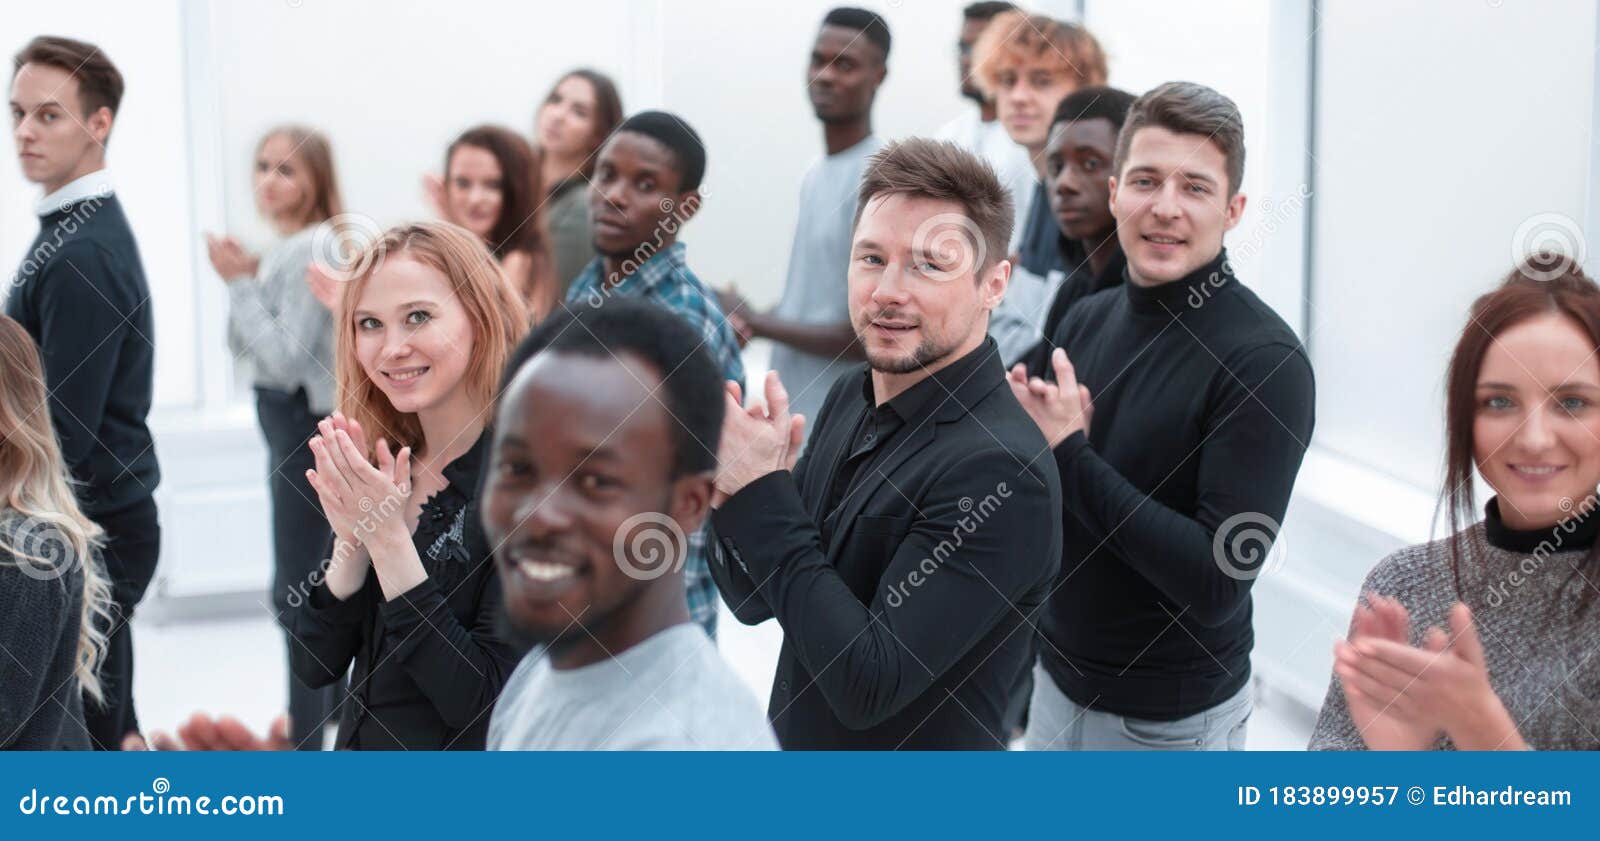 Large Group of Diverse Young People Applauds Together. Stock Image ...